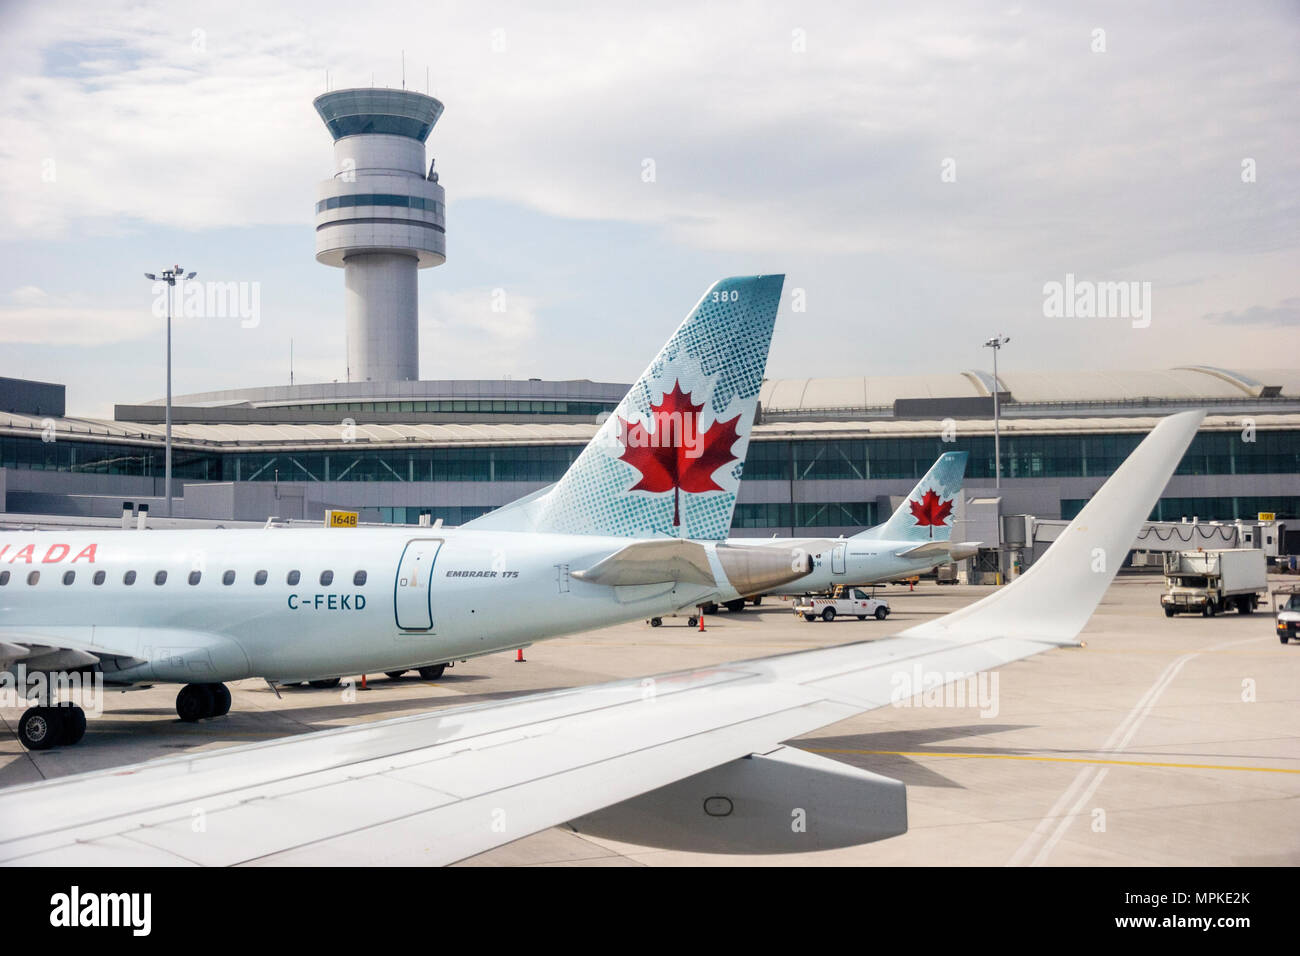 Canada,Canadian,Ontario Province,Toronto,Pearson International Airport,Air Canada,commercial airliner airplane plane aircraft aeroplane,aeroplane,plan Stock Photo